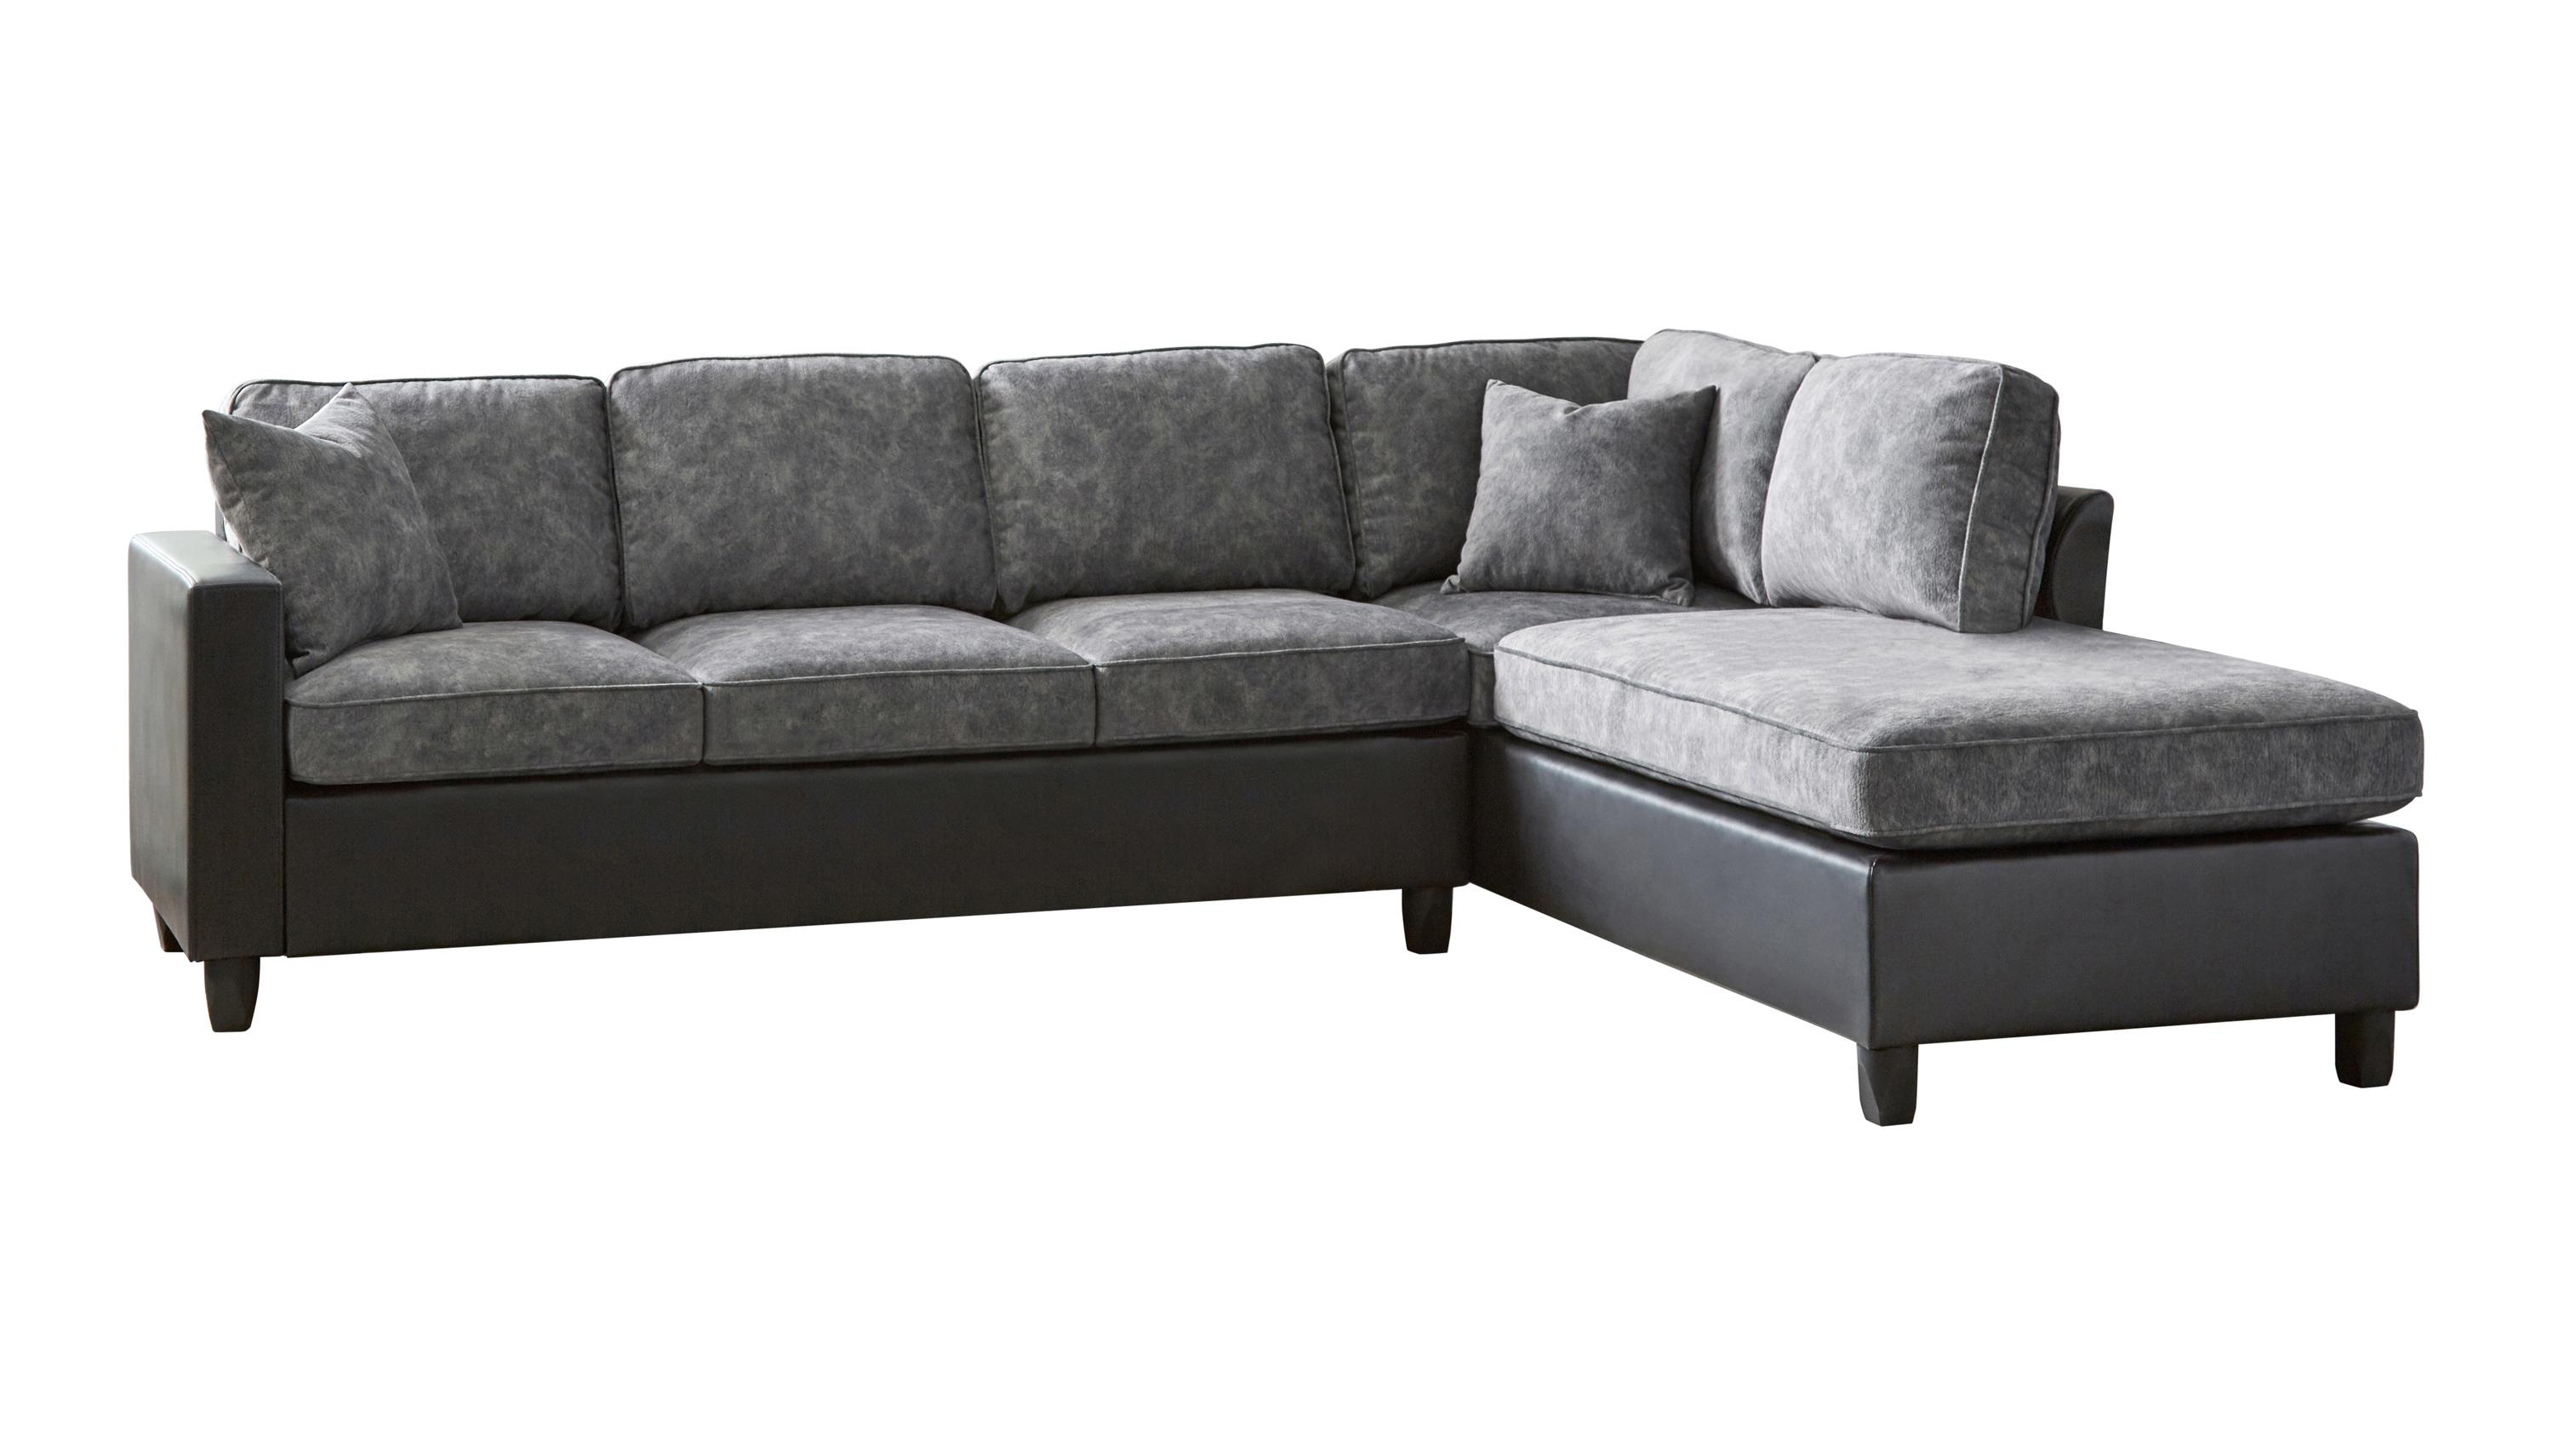 Contemporary Sectional 552040 Vinny 552040 in Pewter Leatherette